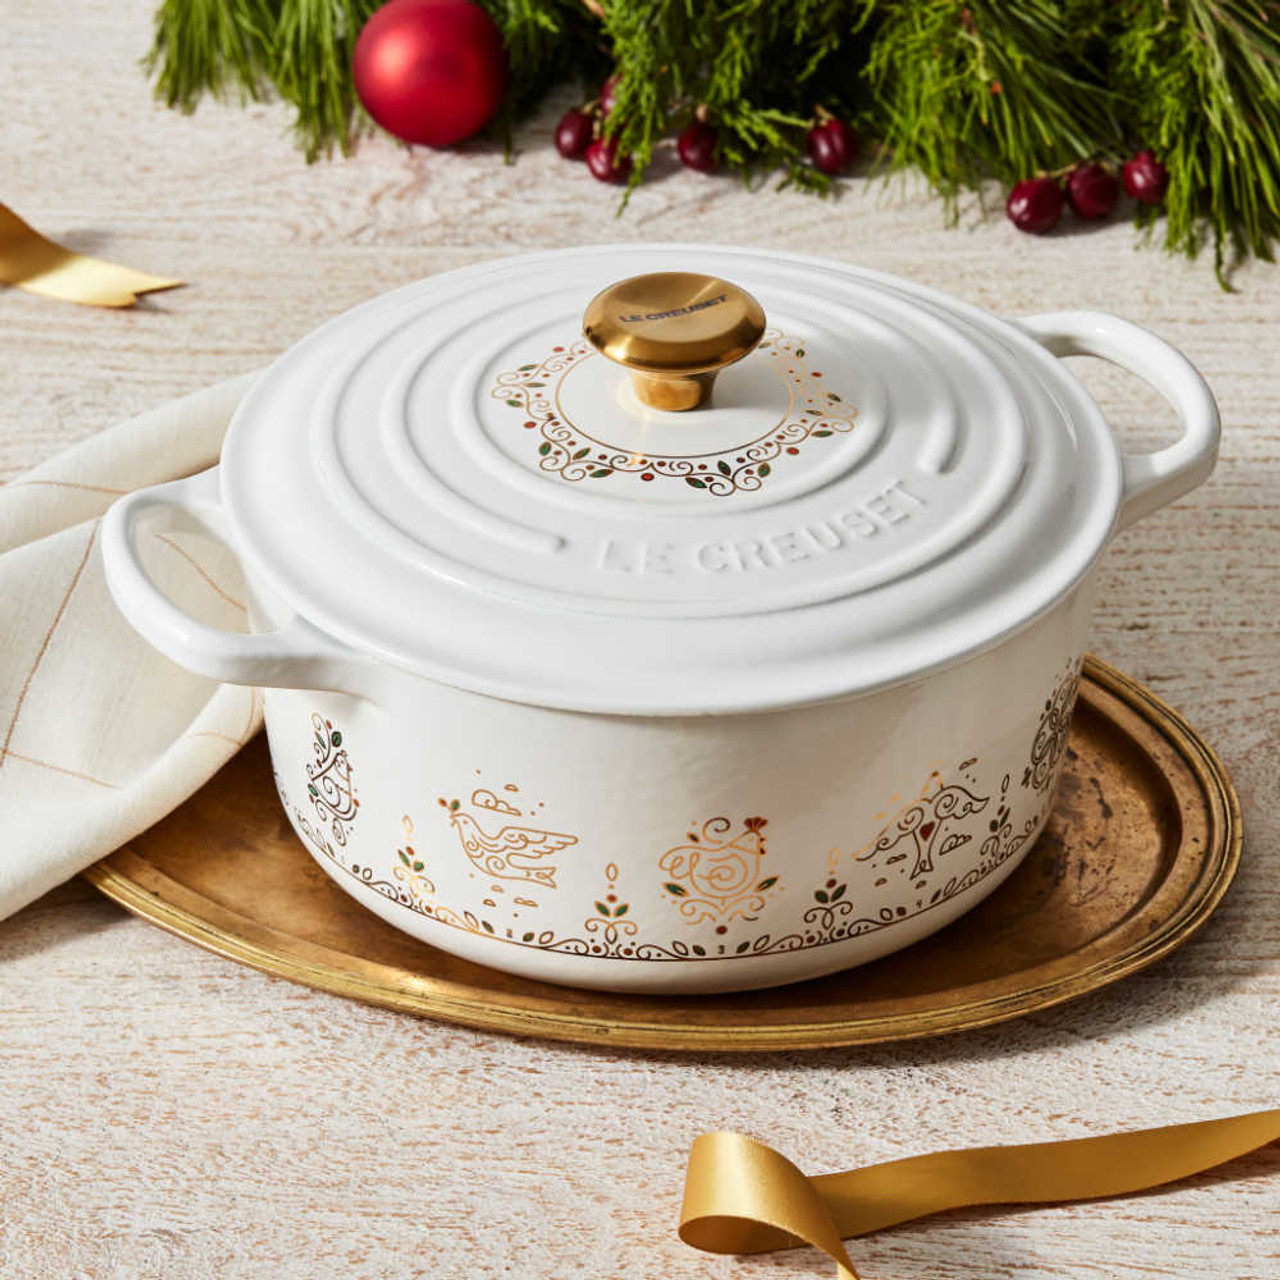 https://cdn11.bigcommerce.com/s-hccytny0od/images/stencil/1280x1280/products/5735/25170/Le_Creuset_Noel_Collection_12_Days_of_Christmas_Dutch_Oven_3__49883.1695928723.jpg?c=2?imbypass=on